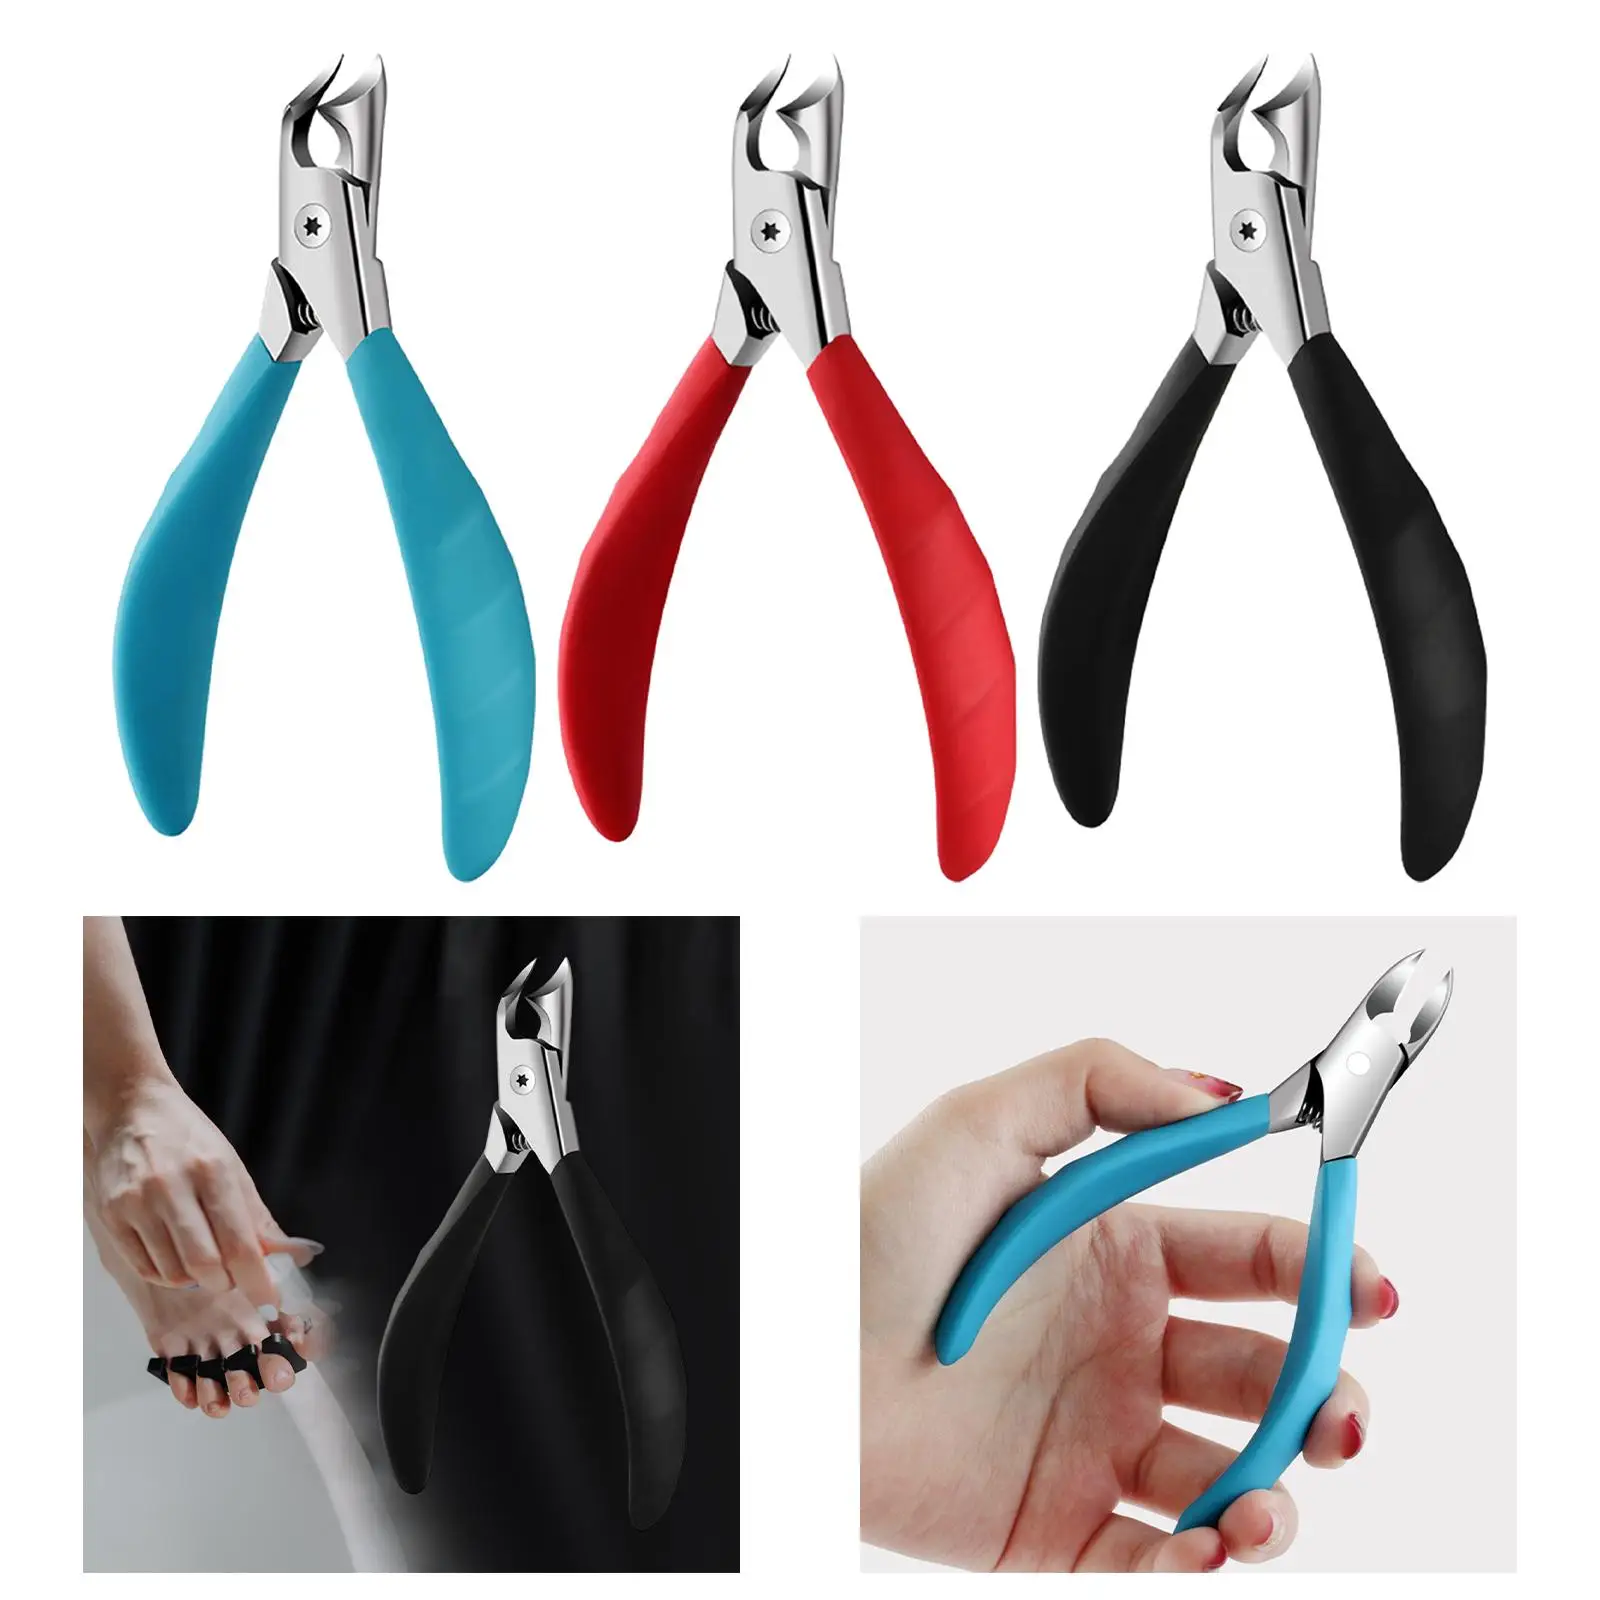 Ingrown Toenail Clippers Heavy Duty Thick Nails Cutter for Home Ingrown Toenail Treatment